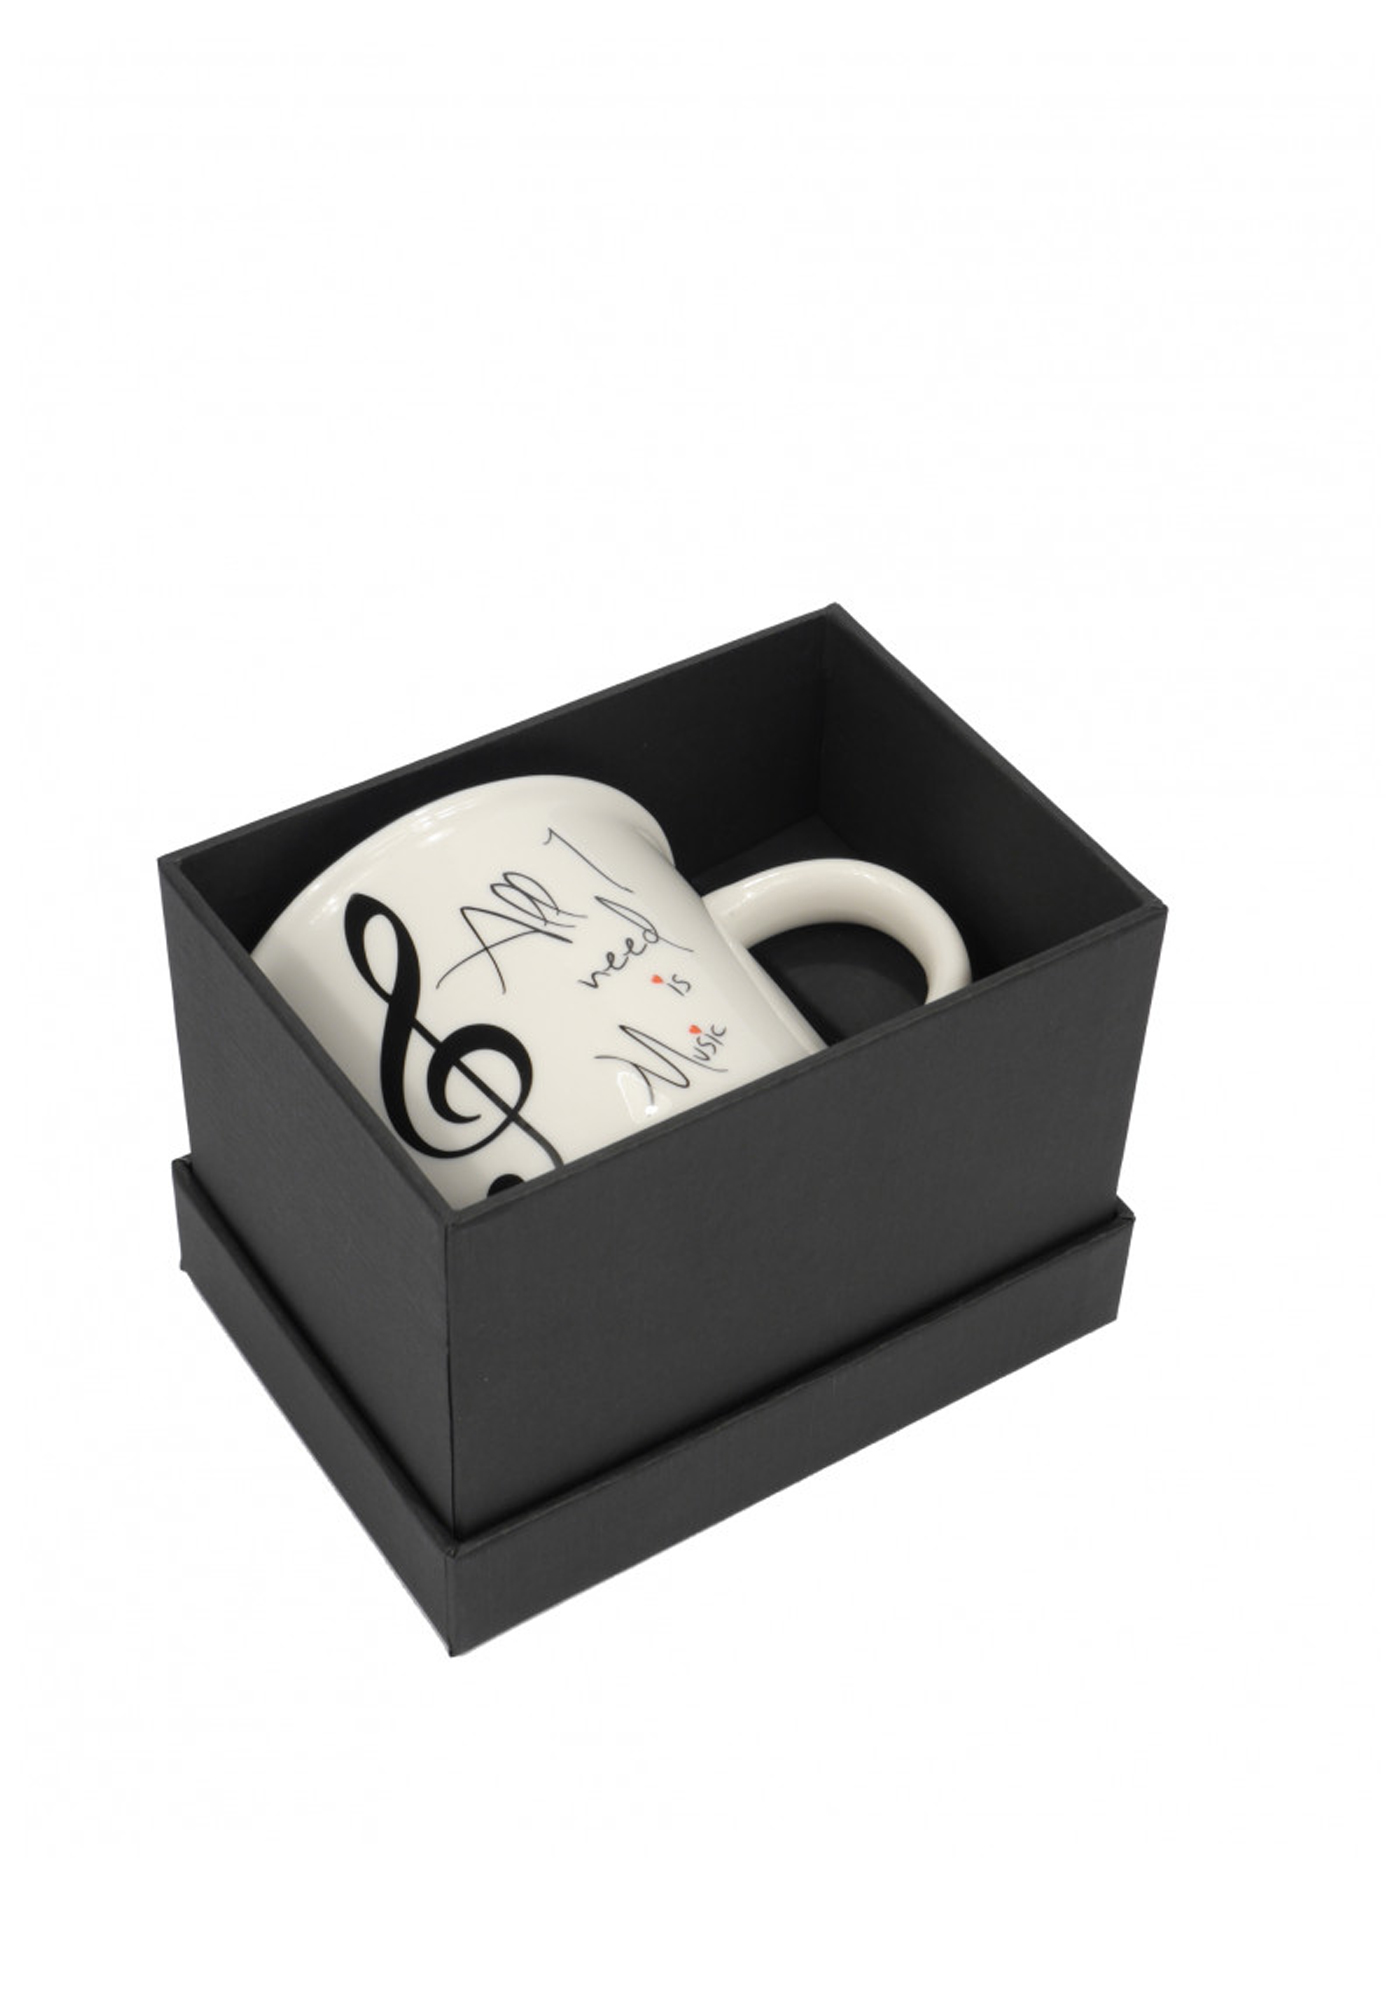 Mug   "All I Need Is Music" White 350 ML with Gift Case